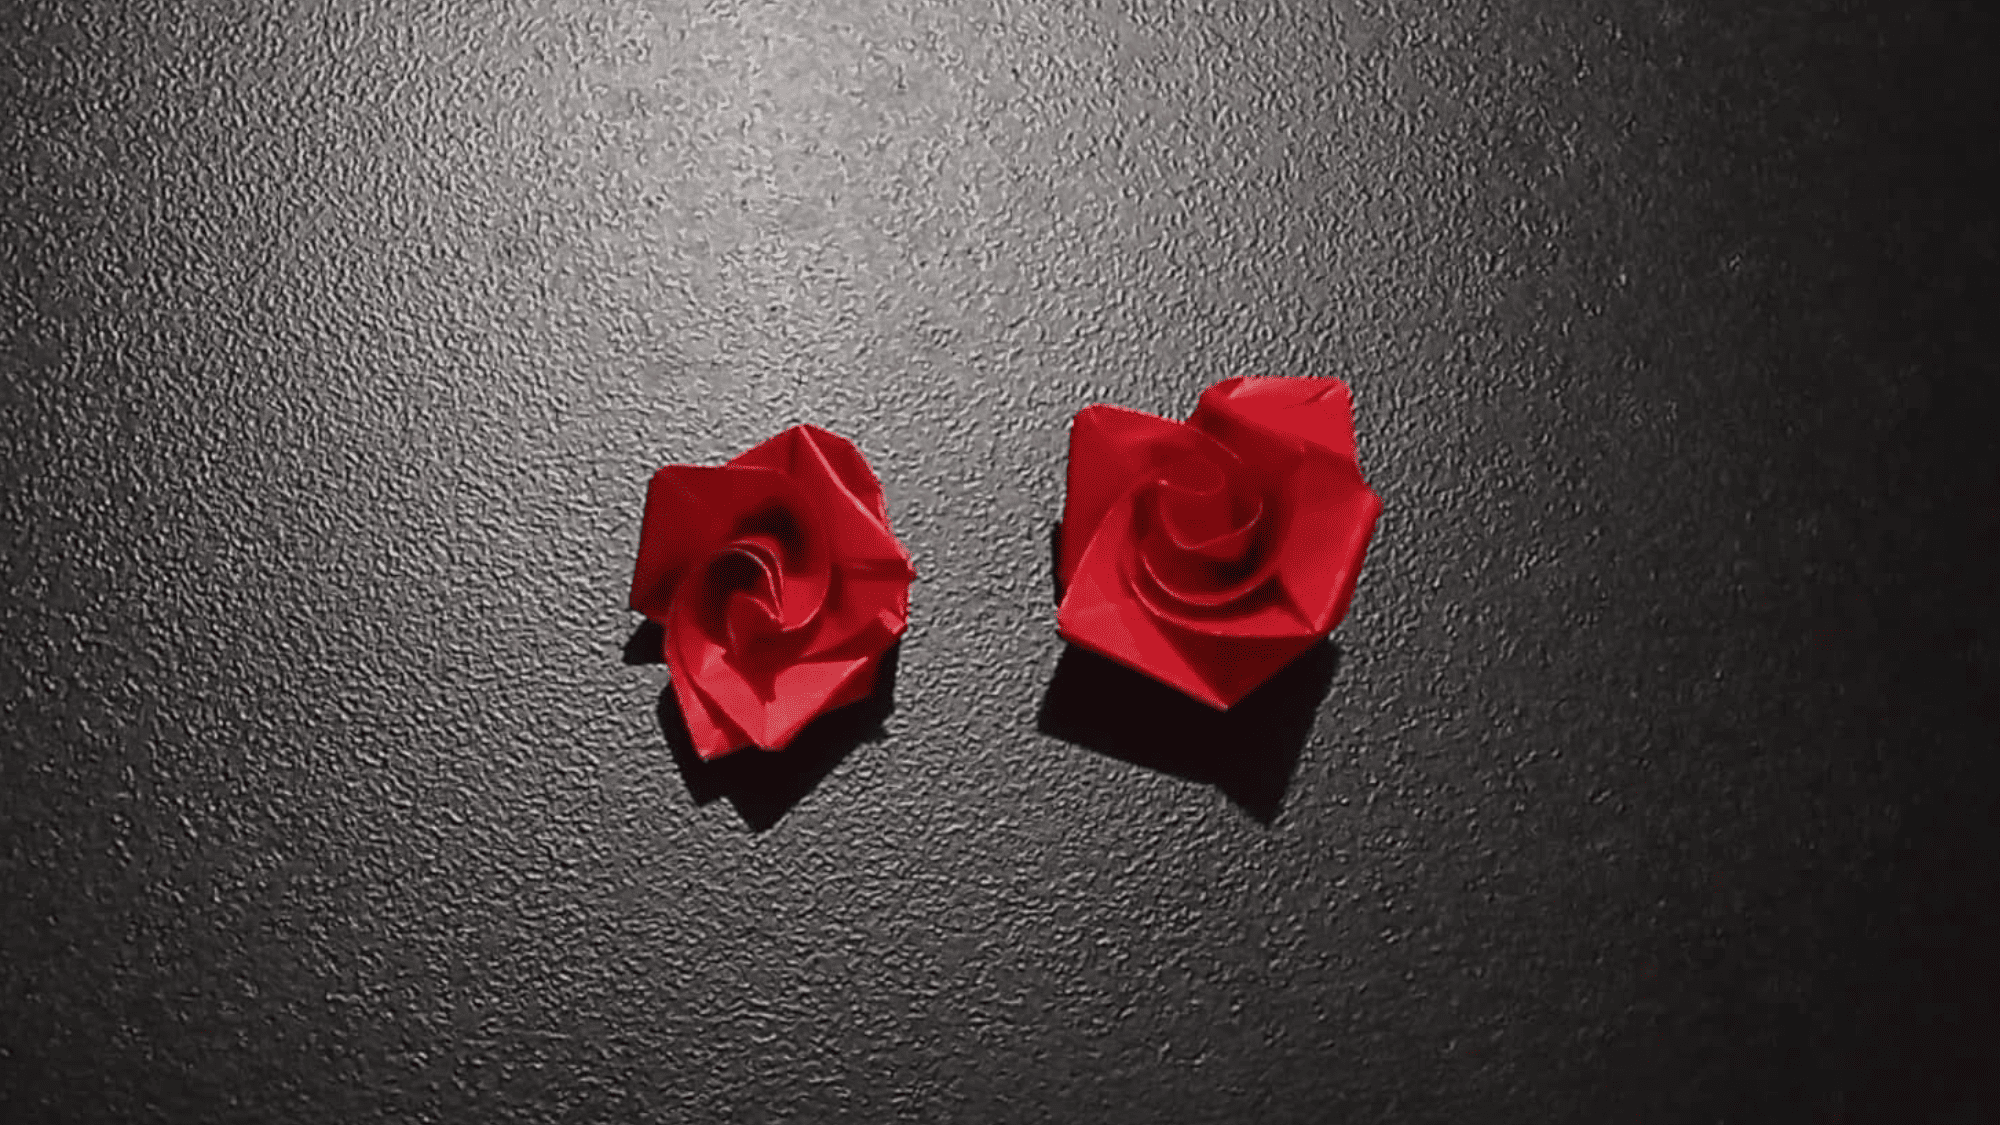 Origami Rose Instructions